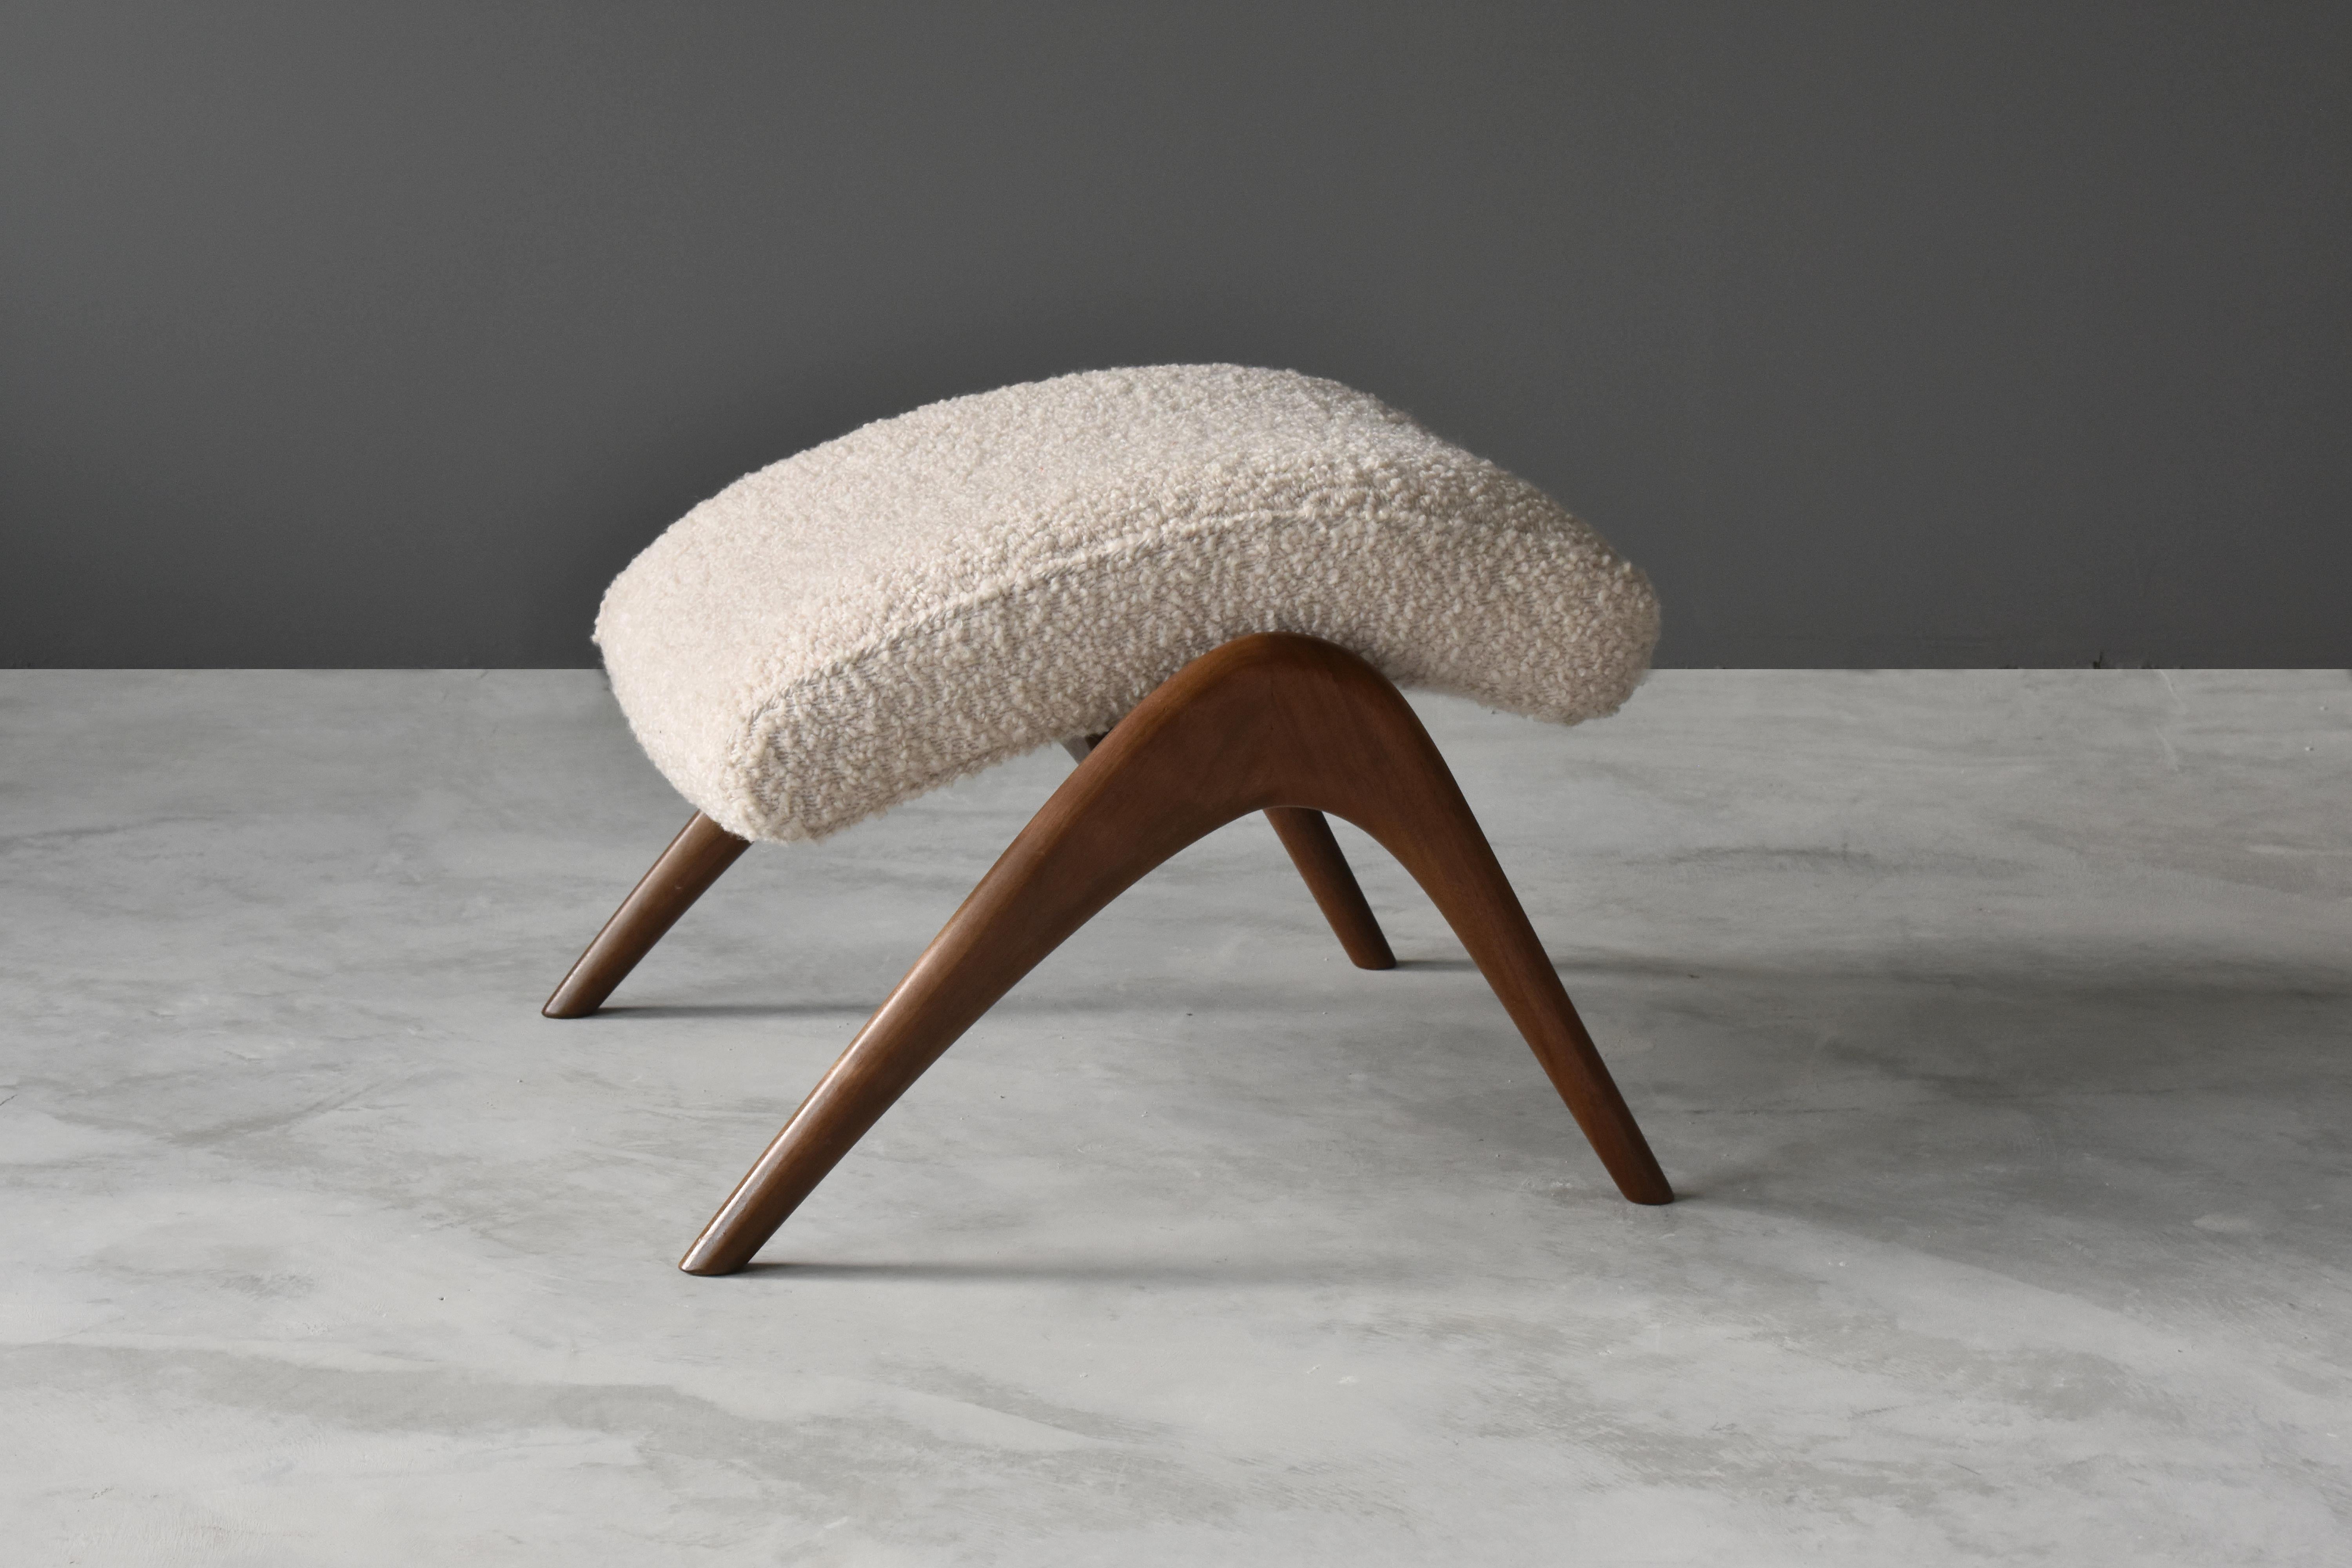 An organic ottoman / stool / bench by Vladimir Kagan. Sculpted walnut frame with overstuffed seat in white high-end European Bouclé. Bears label.

Present example is an early one produced in the Studio of Vladimir Kagan in the 1970s. 

Other